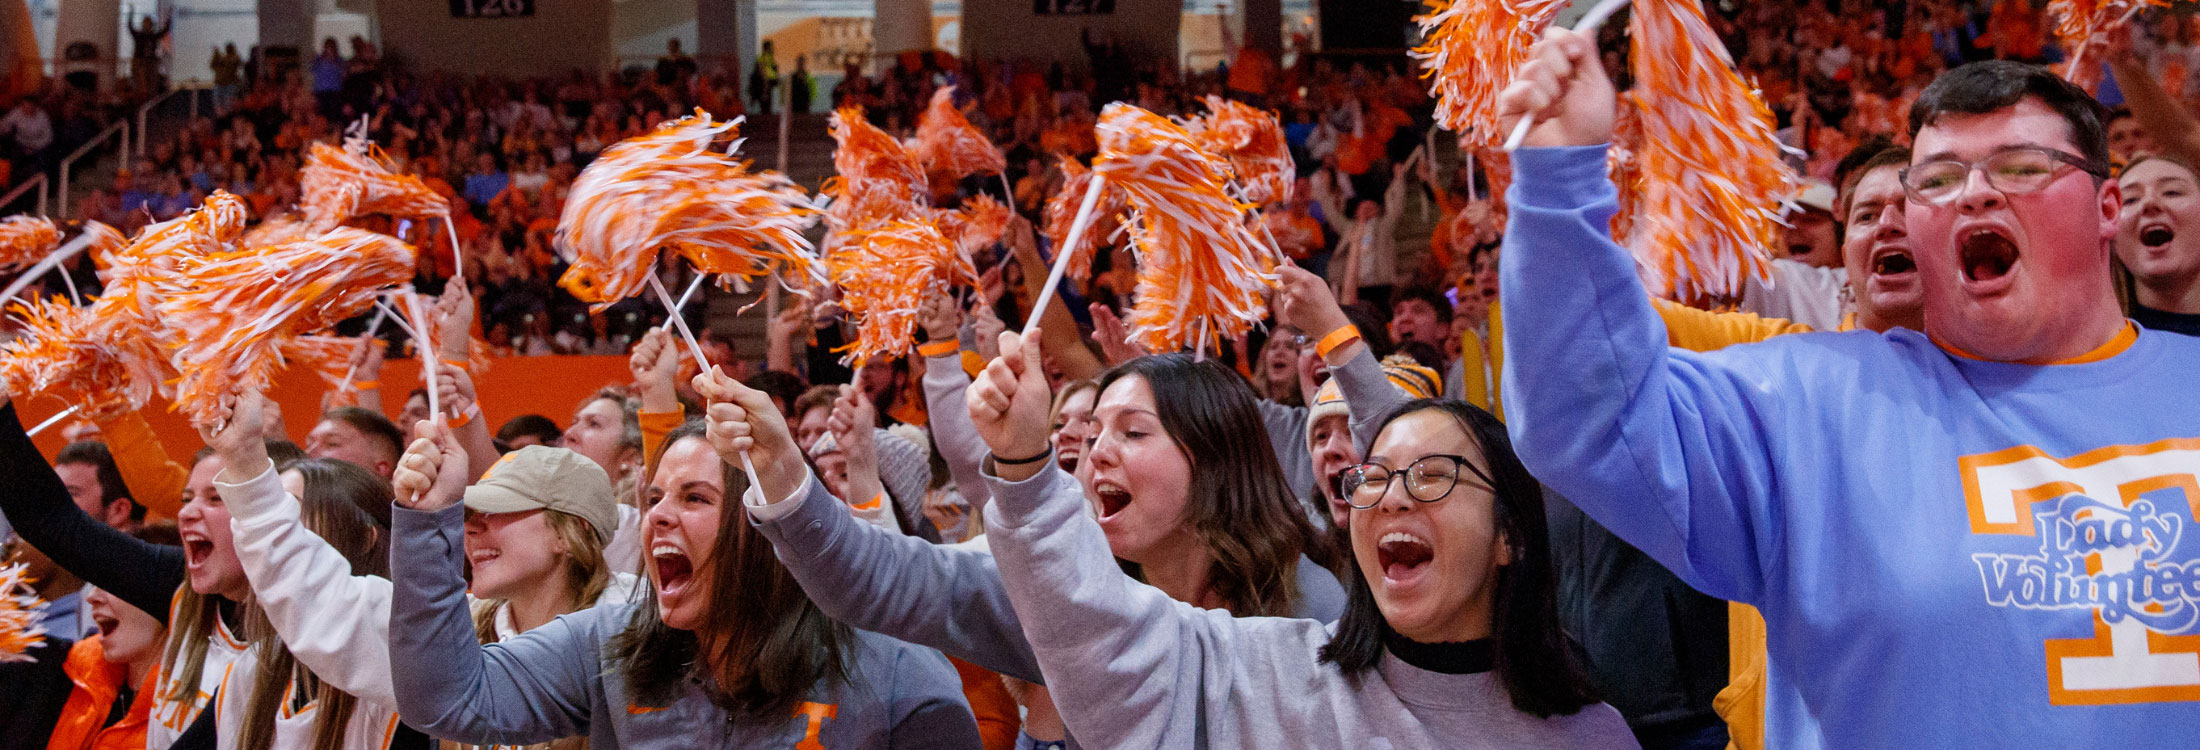 A group of diverse UT students join together to shake their orange and white pom poms at a UT Lady Vols game.